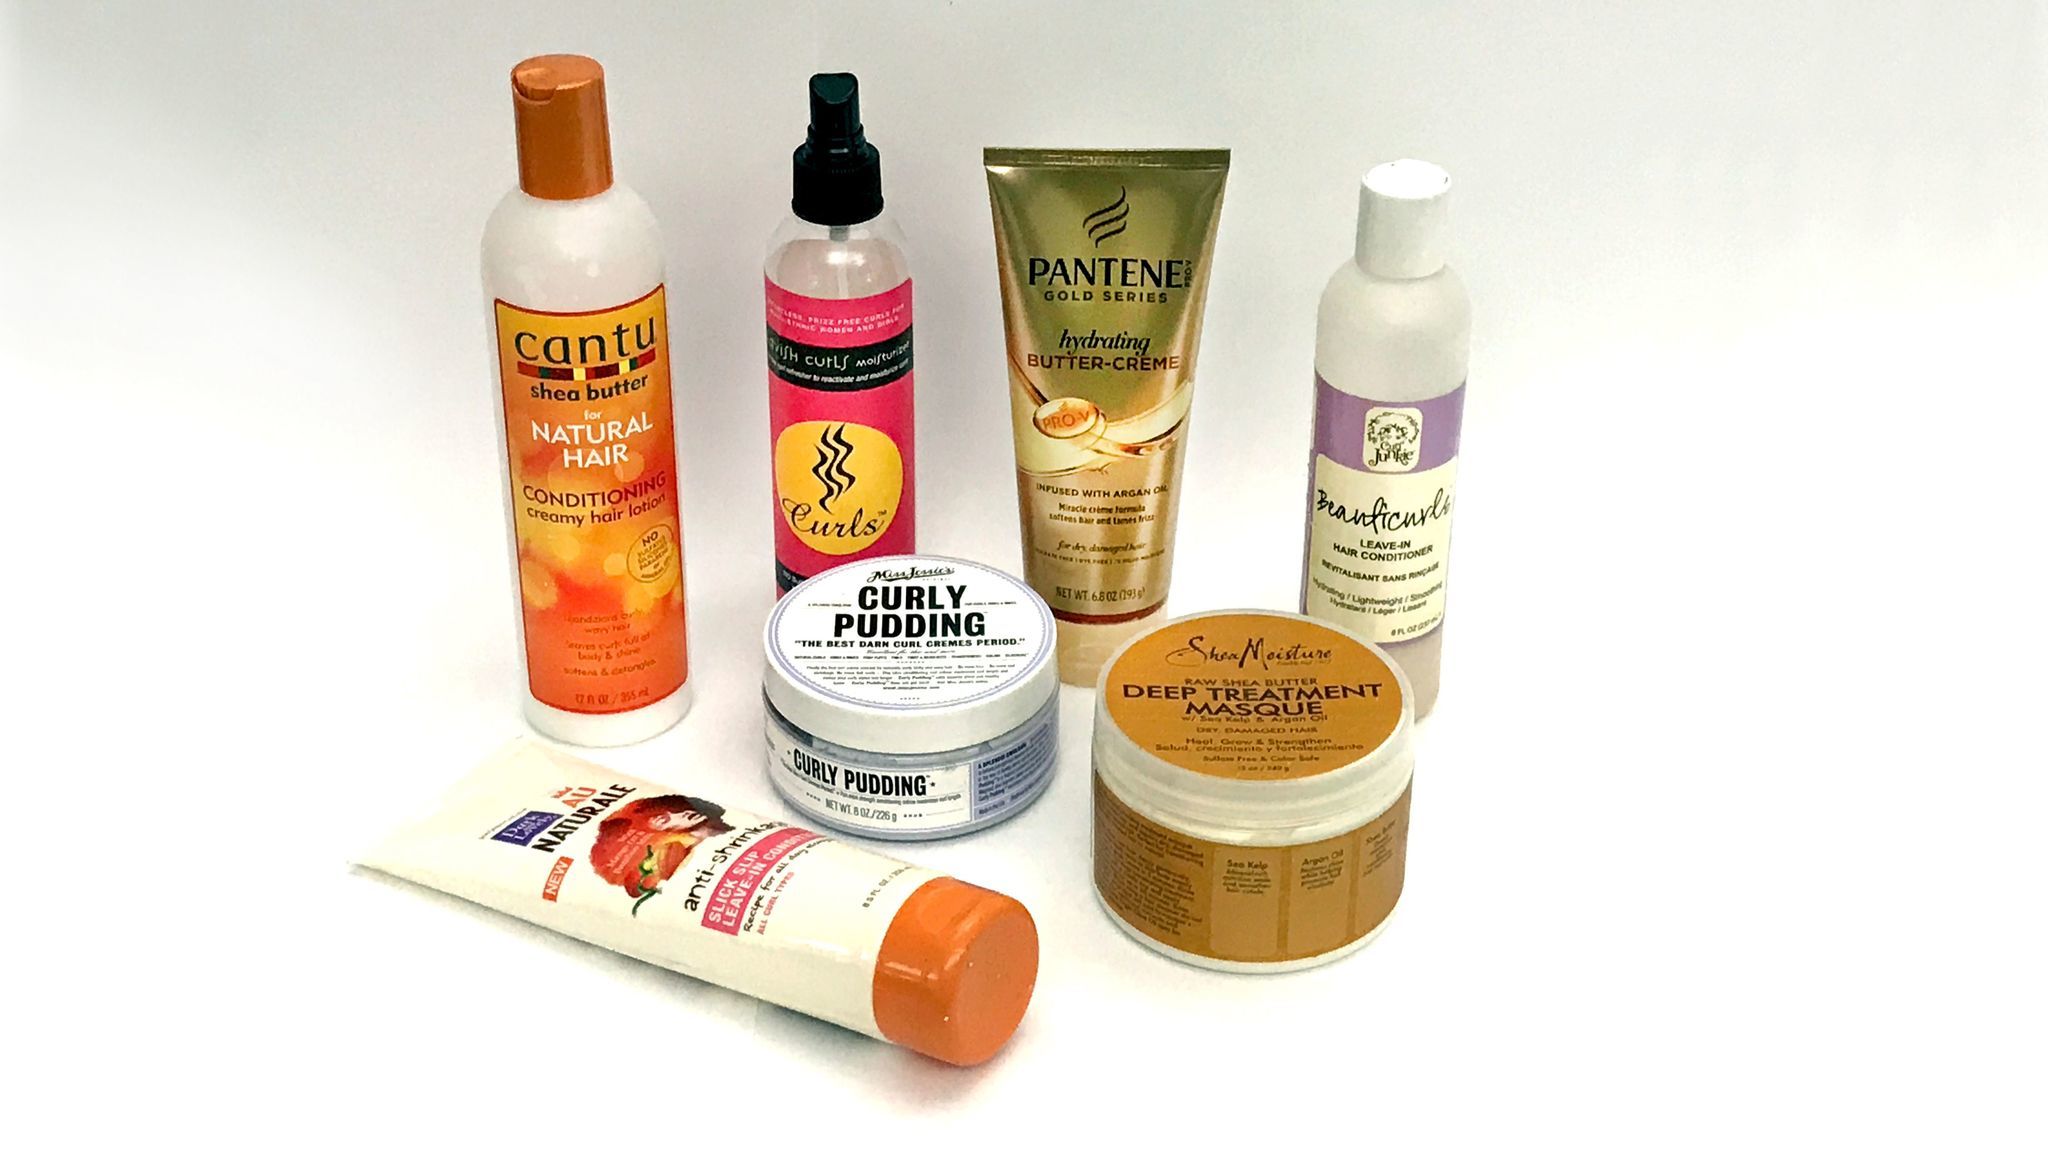 Natural hair has hit the mainstream and companies are eager to cash in. Pictured is a sampling of natural hair products including Cantu, Curls, Miss Jessie's, Au Naturale and  SheaMoisture.